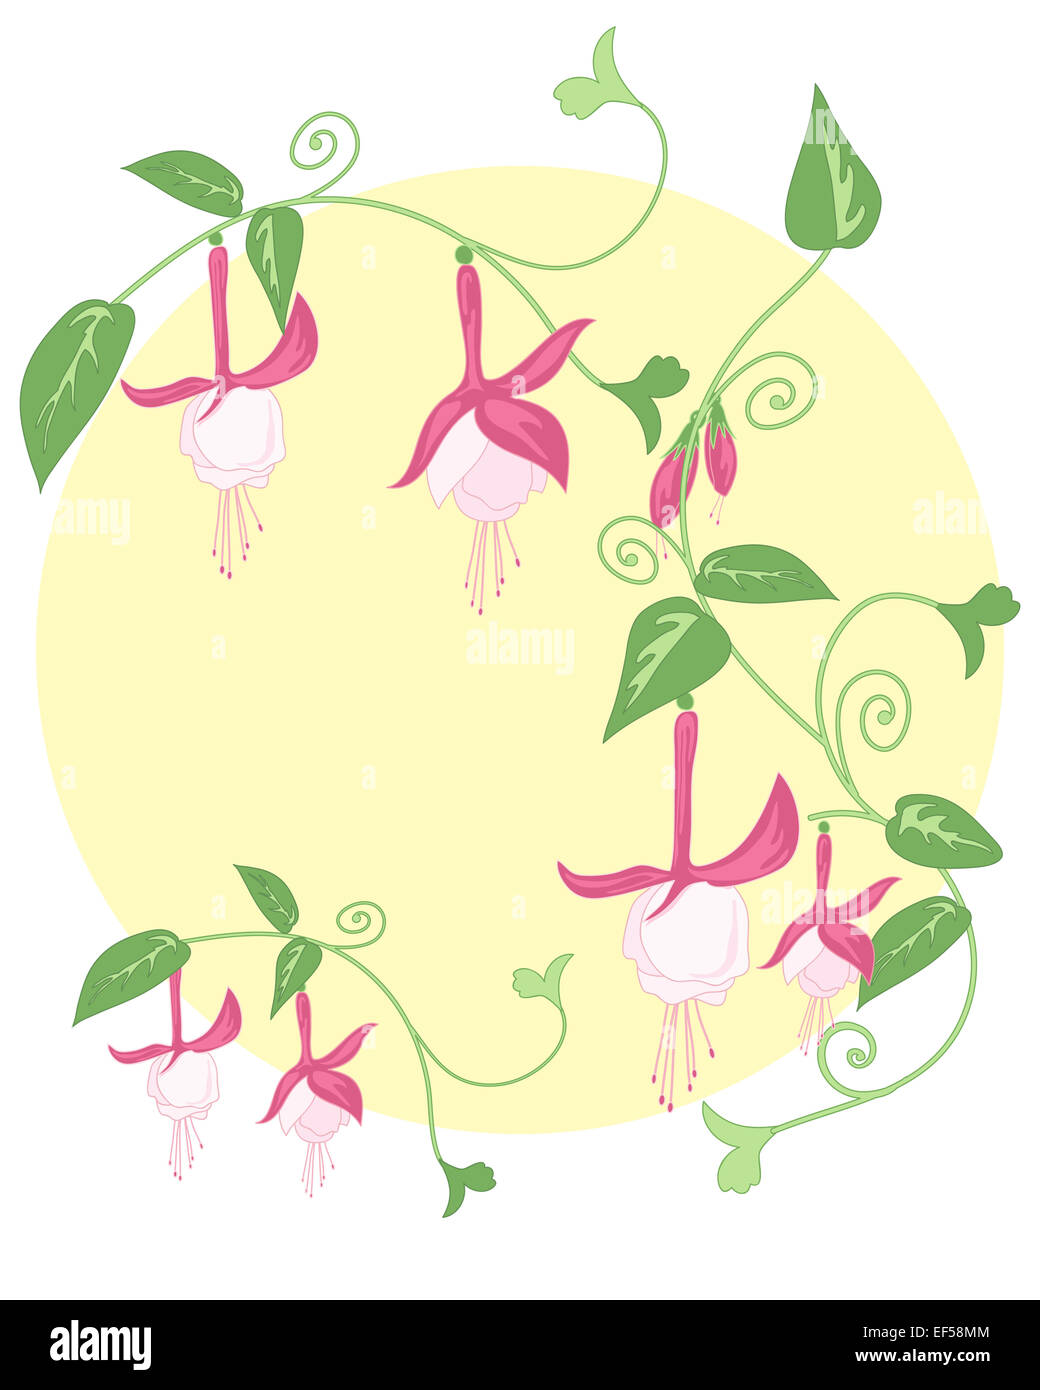 an illustration of a floral design with stylized green foliage and pretty fuchsia flowers on a yellow sun background Stock Photo